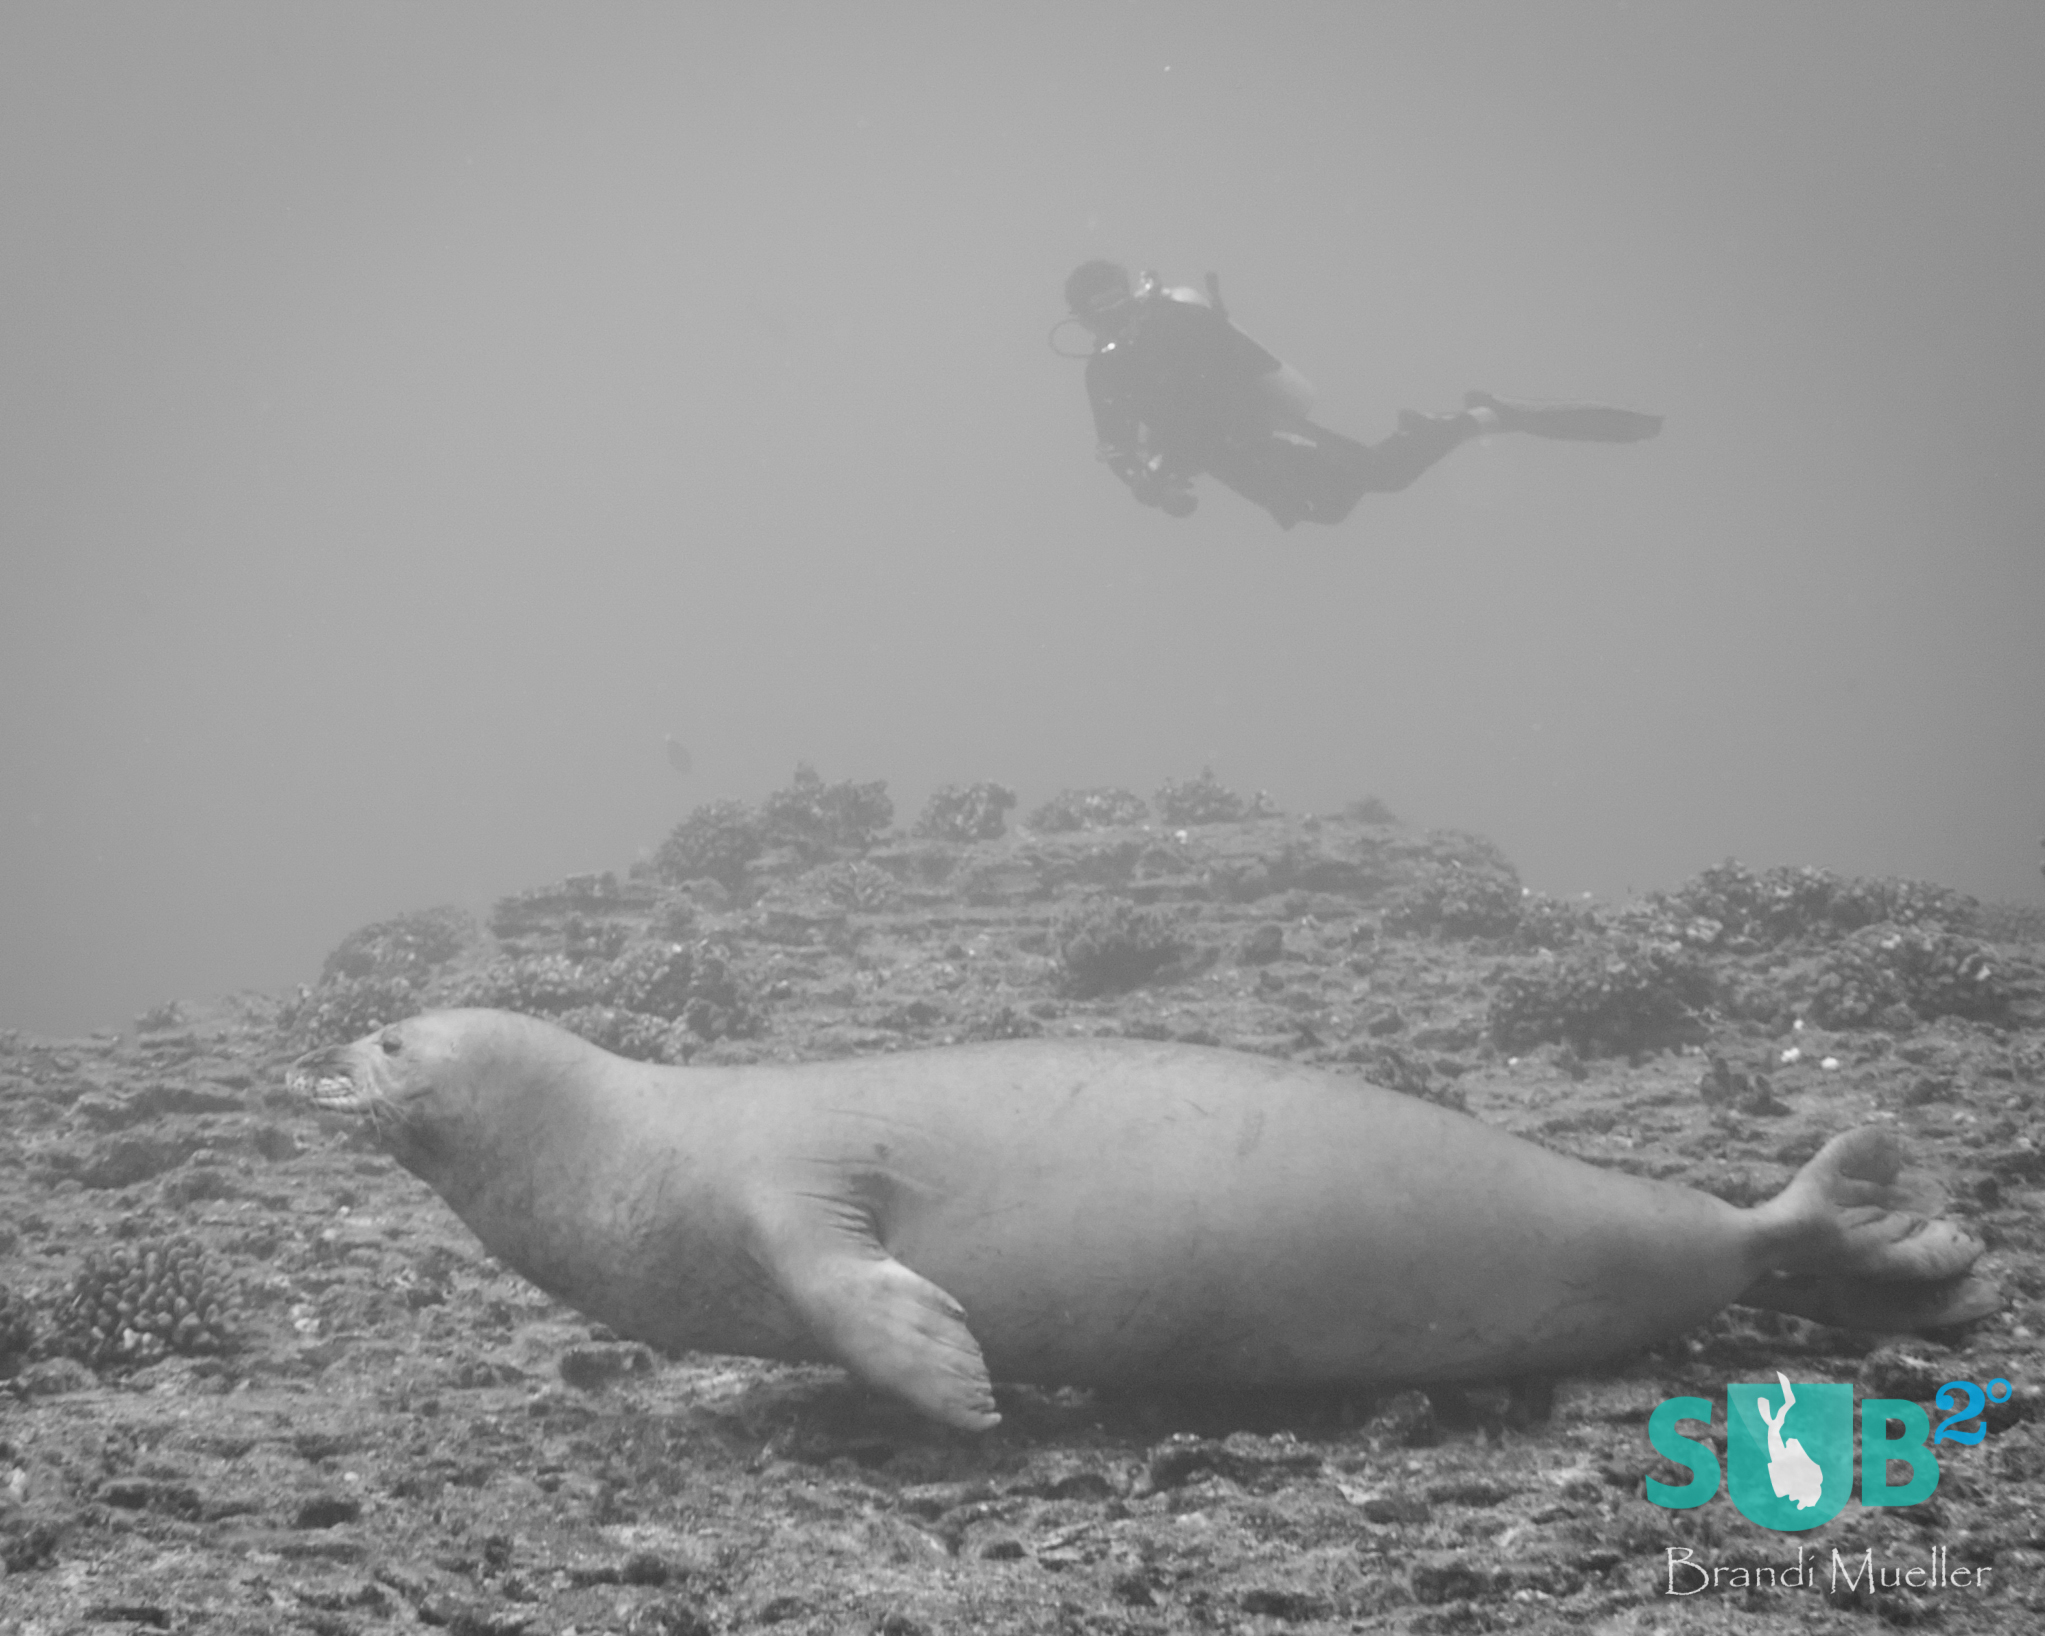 A diver gets a glimpse of an endangered Hawaiian monk seal.